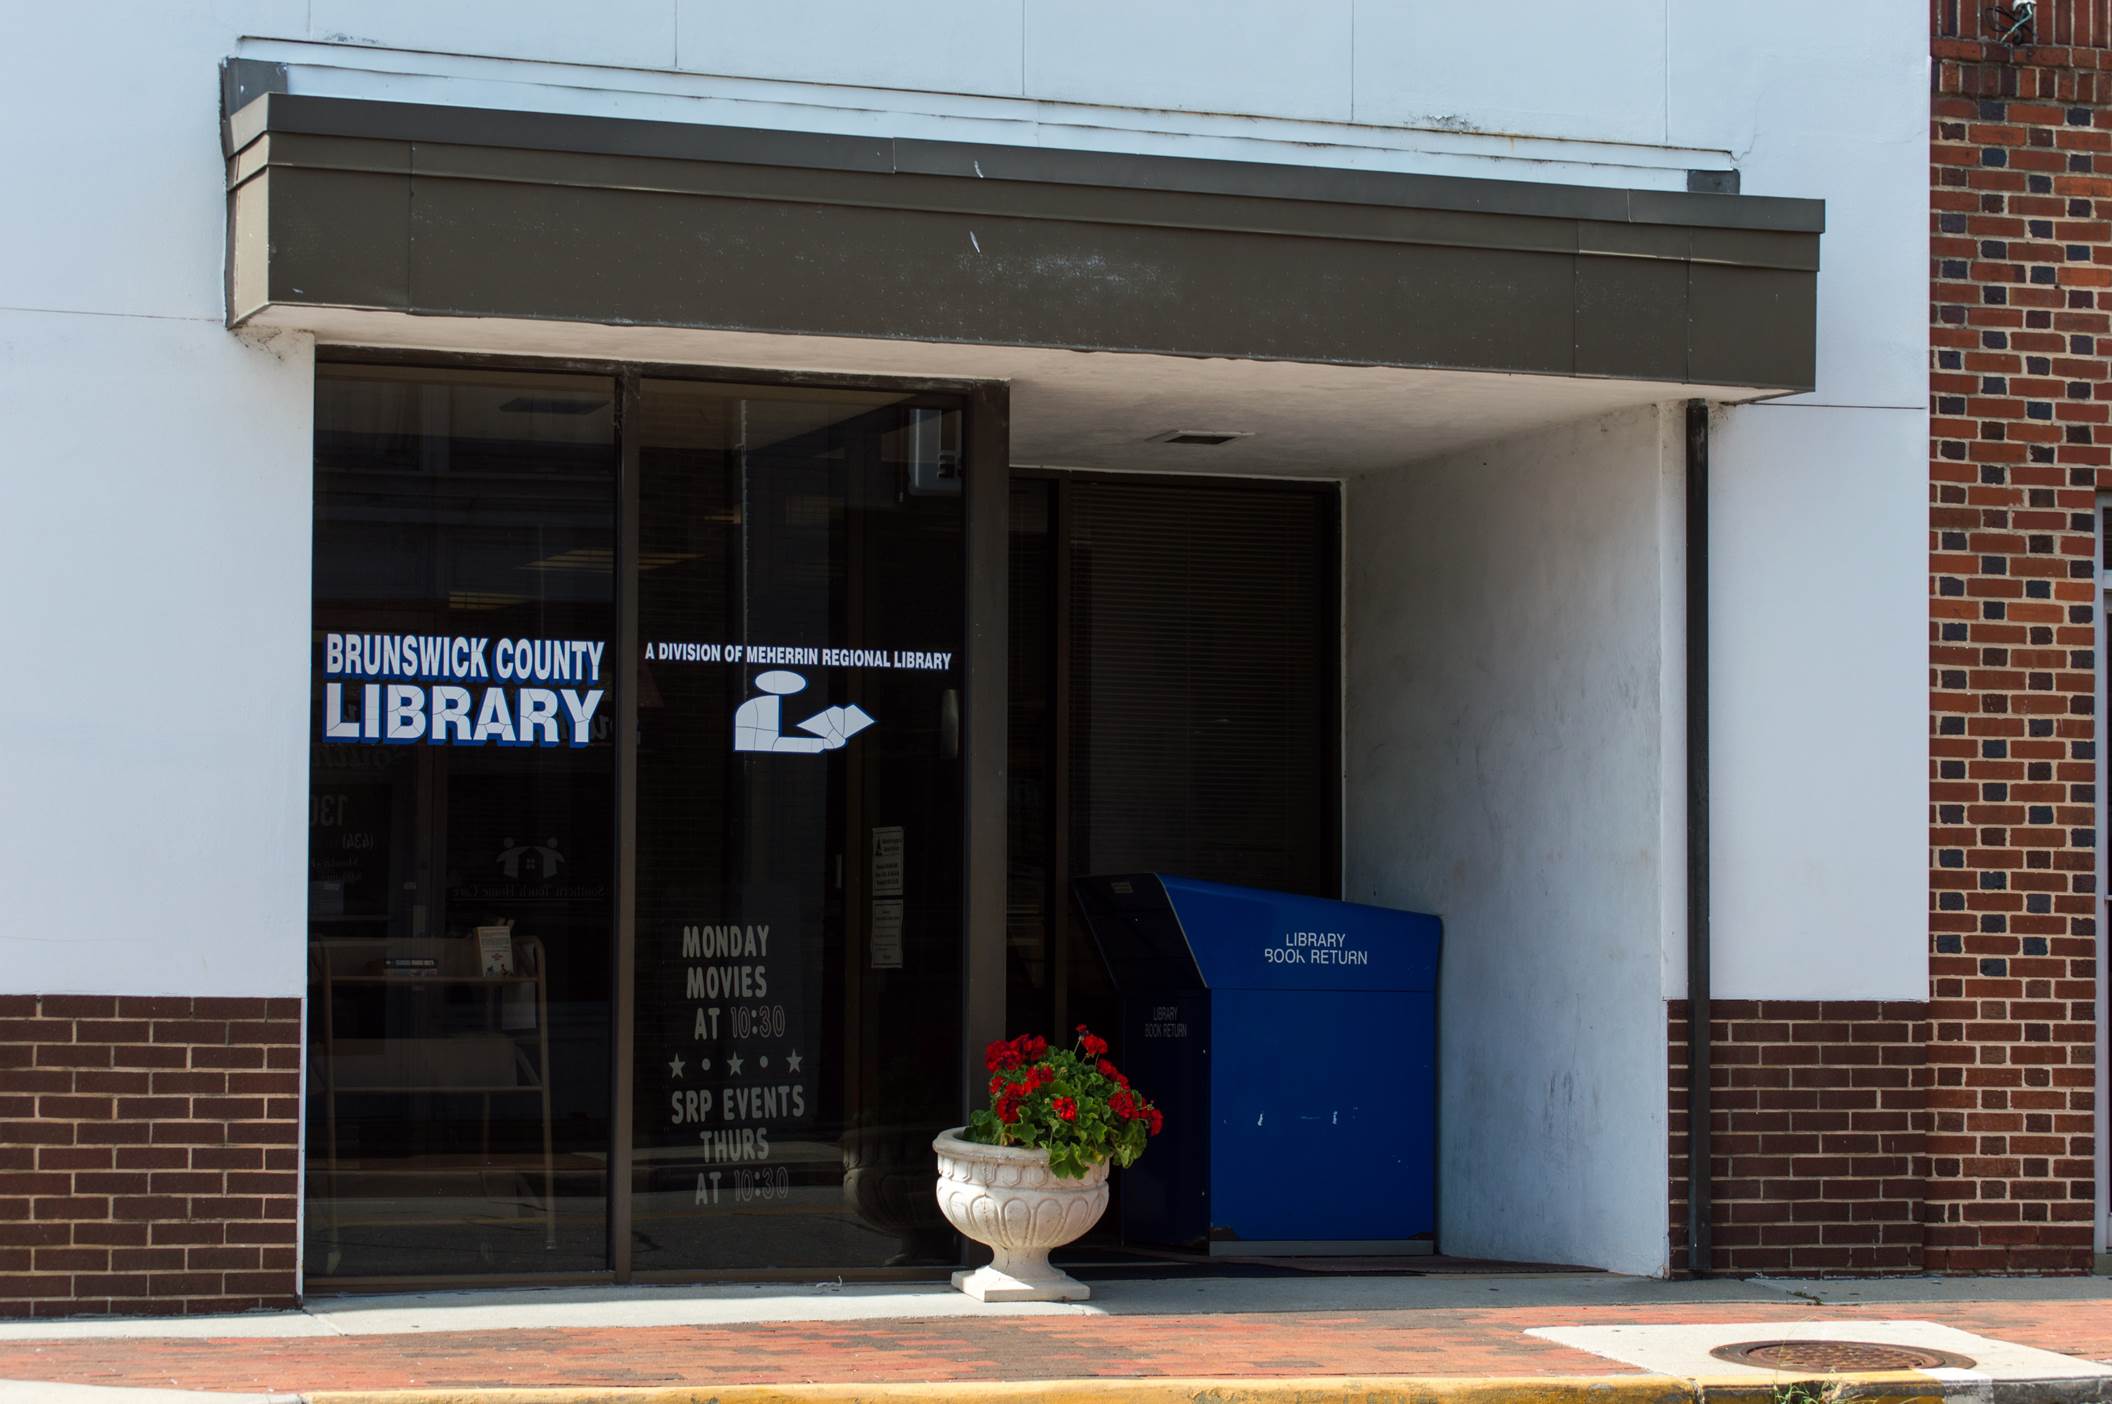 An image of the Brunswick County Library